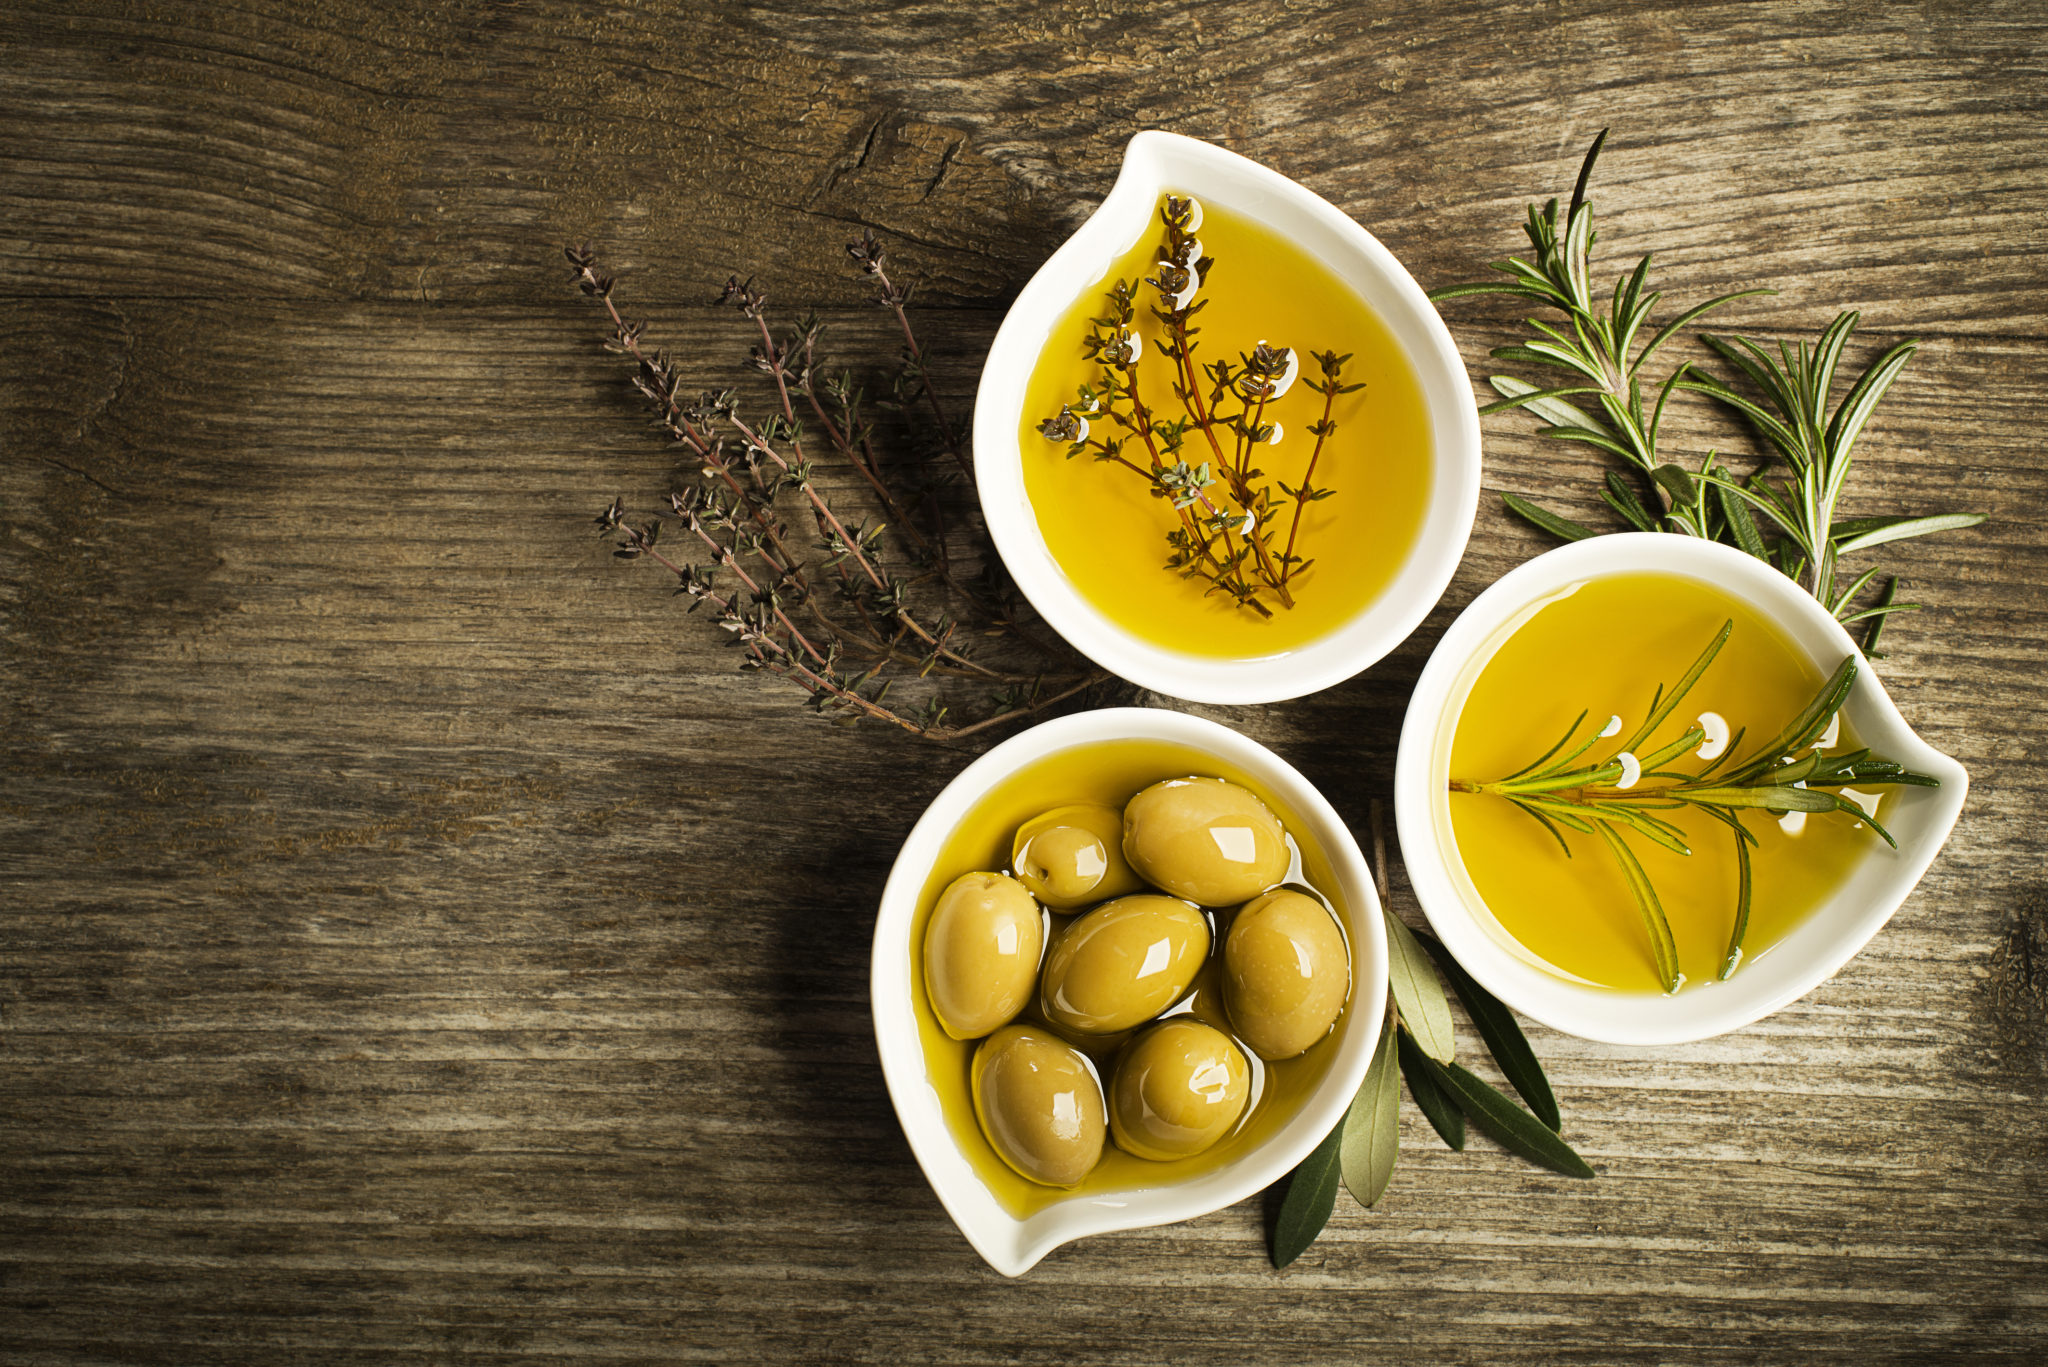 olive oil benefits and side effects